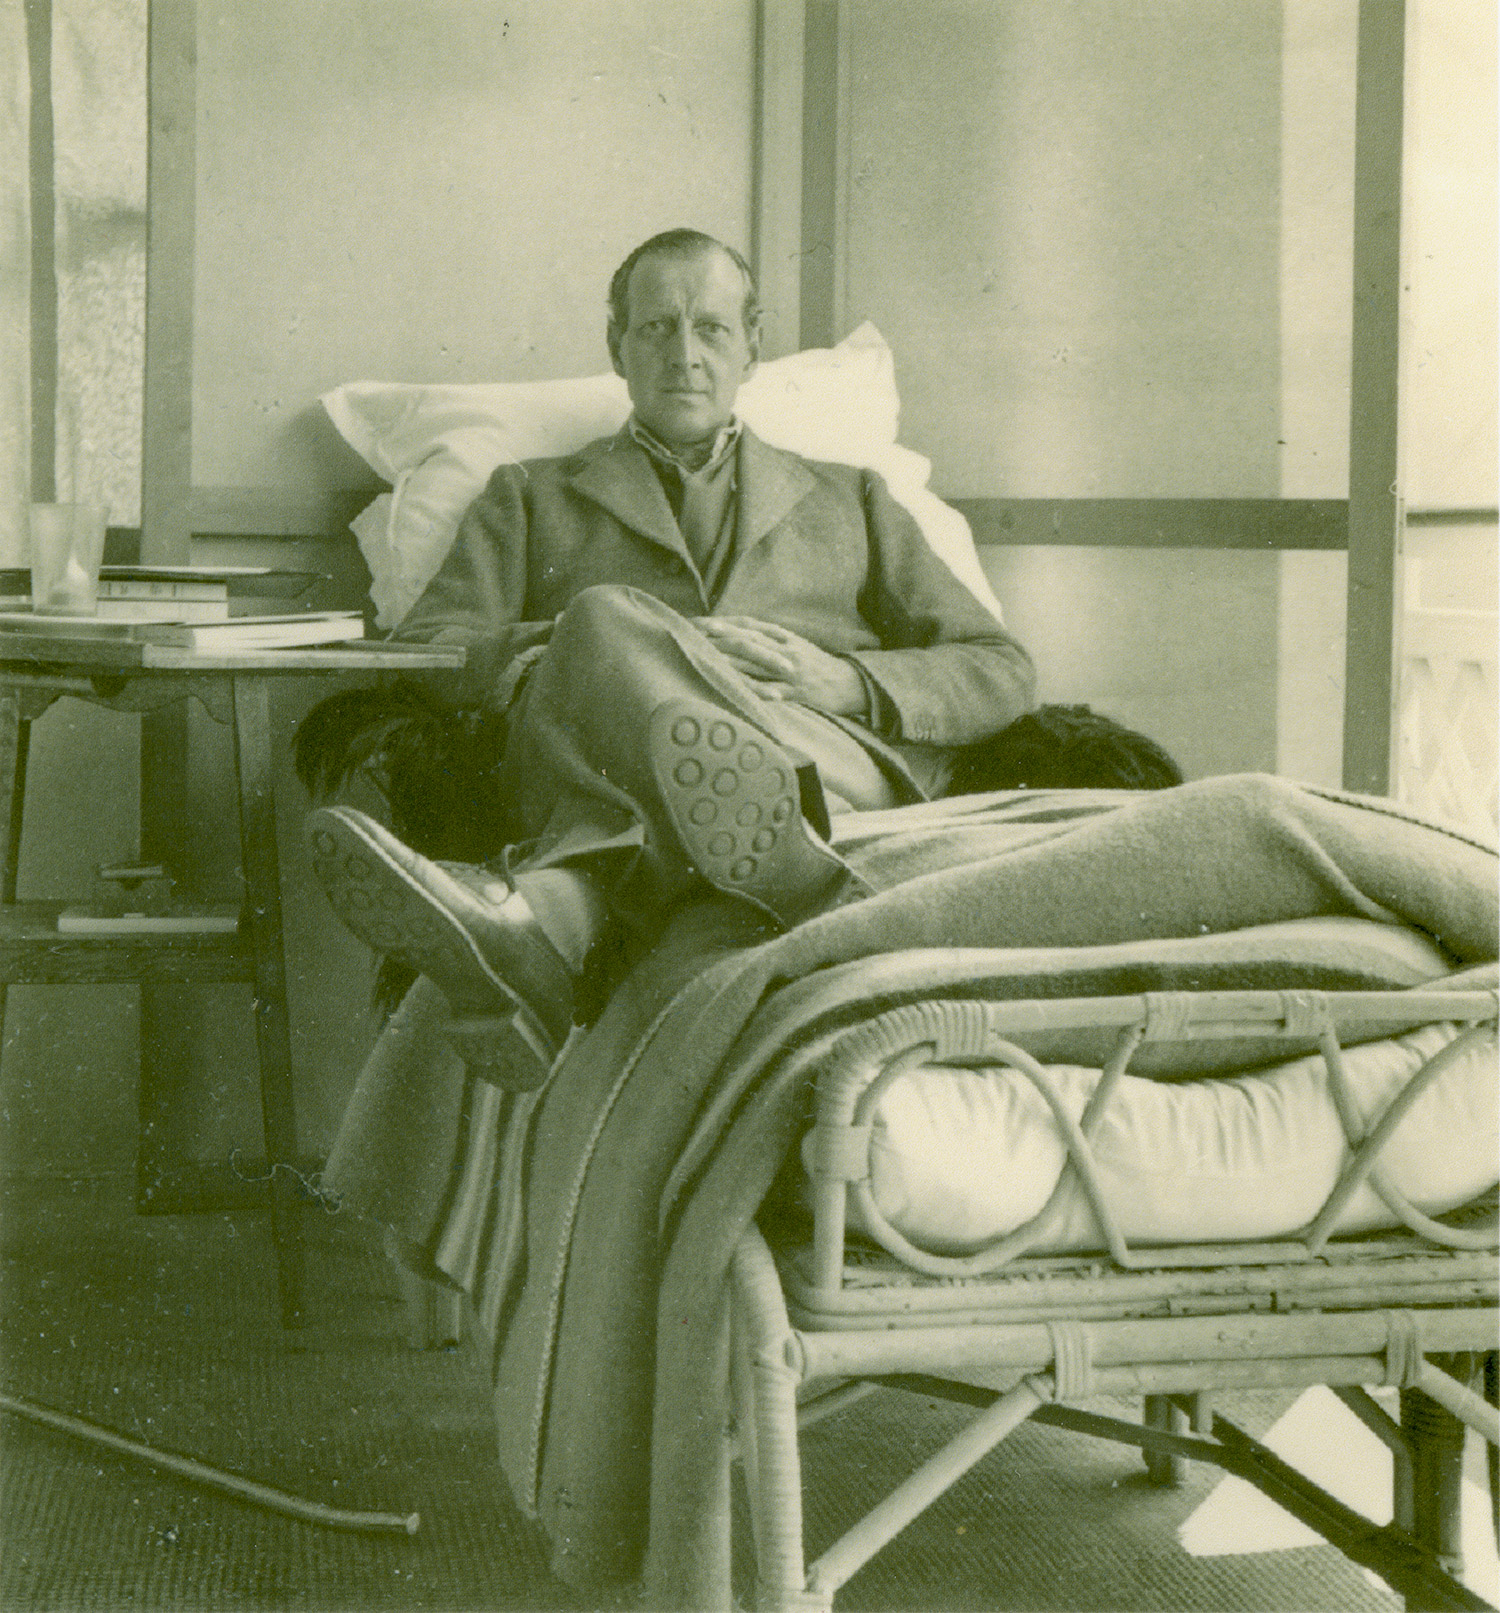 Grand Duke Dmitri was born with poor health. He led a sporty life, but like many Romanov men smoked a lot. / Pictured: Dmitri in a Swiss sanatorium, sick with tuberculosis. Here he spent the last years of his life.